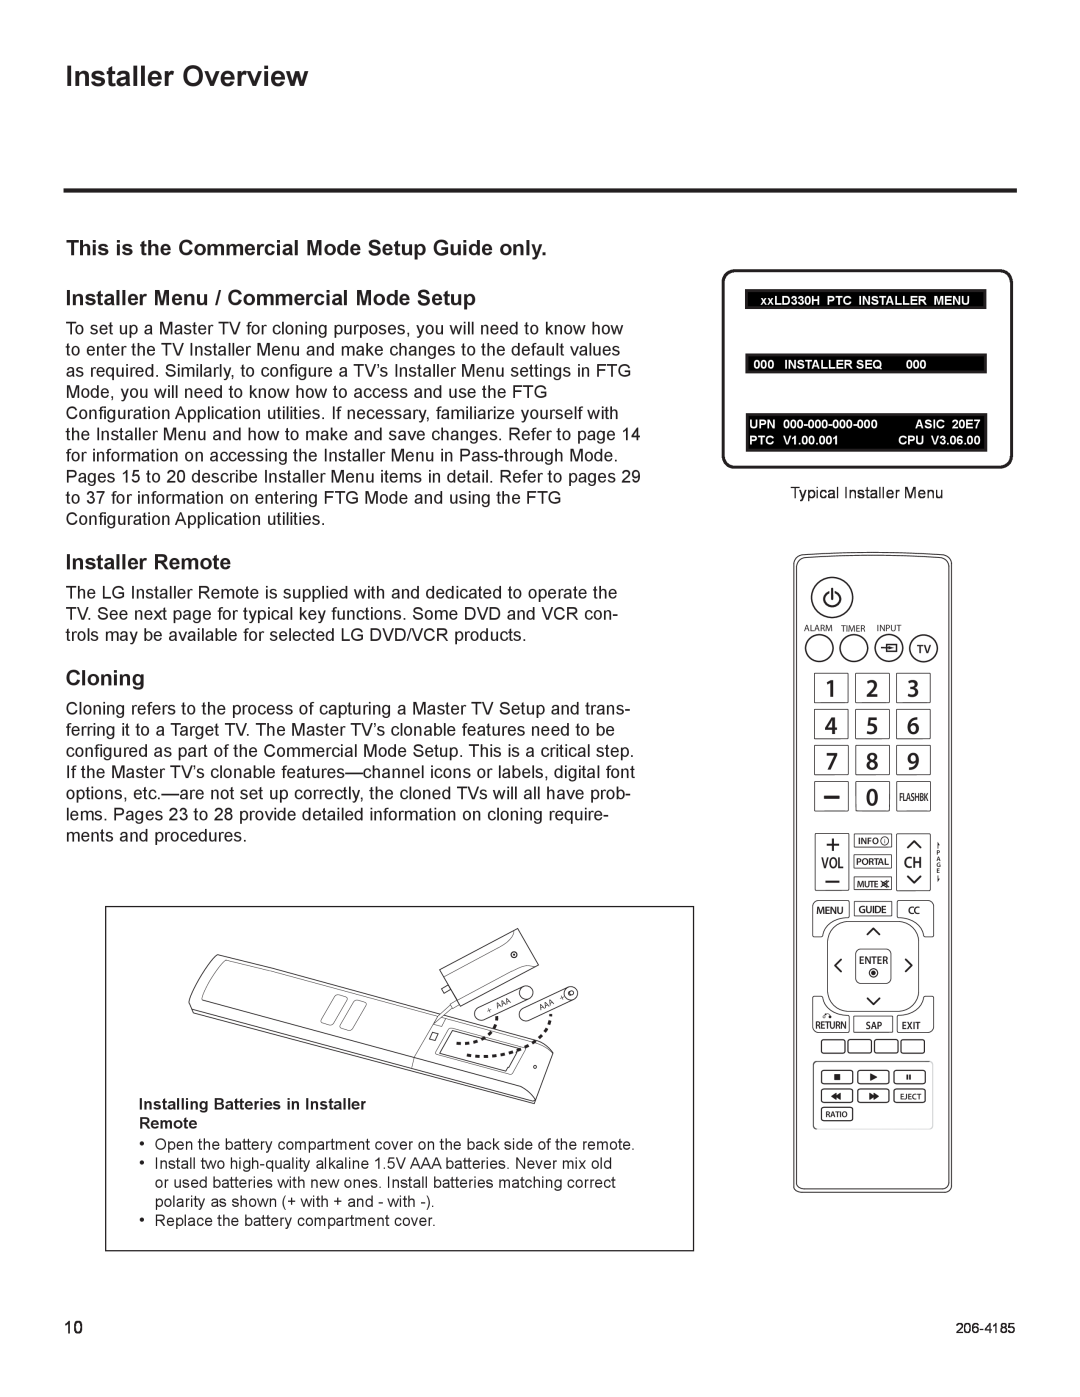 LG Electronics 32LD330H Installer Overview, This is the Commercial Mode Setup Guide only, Installer Remote, Cloning 